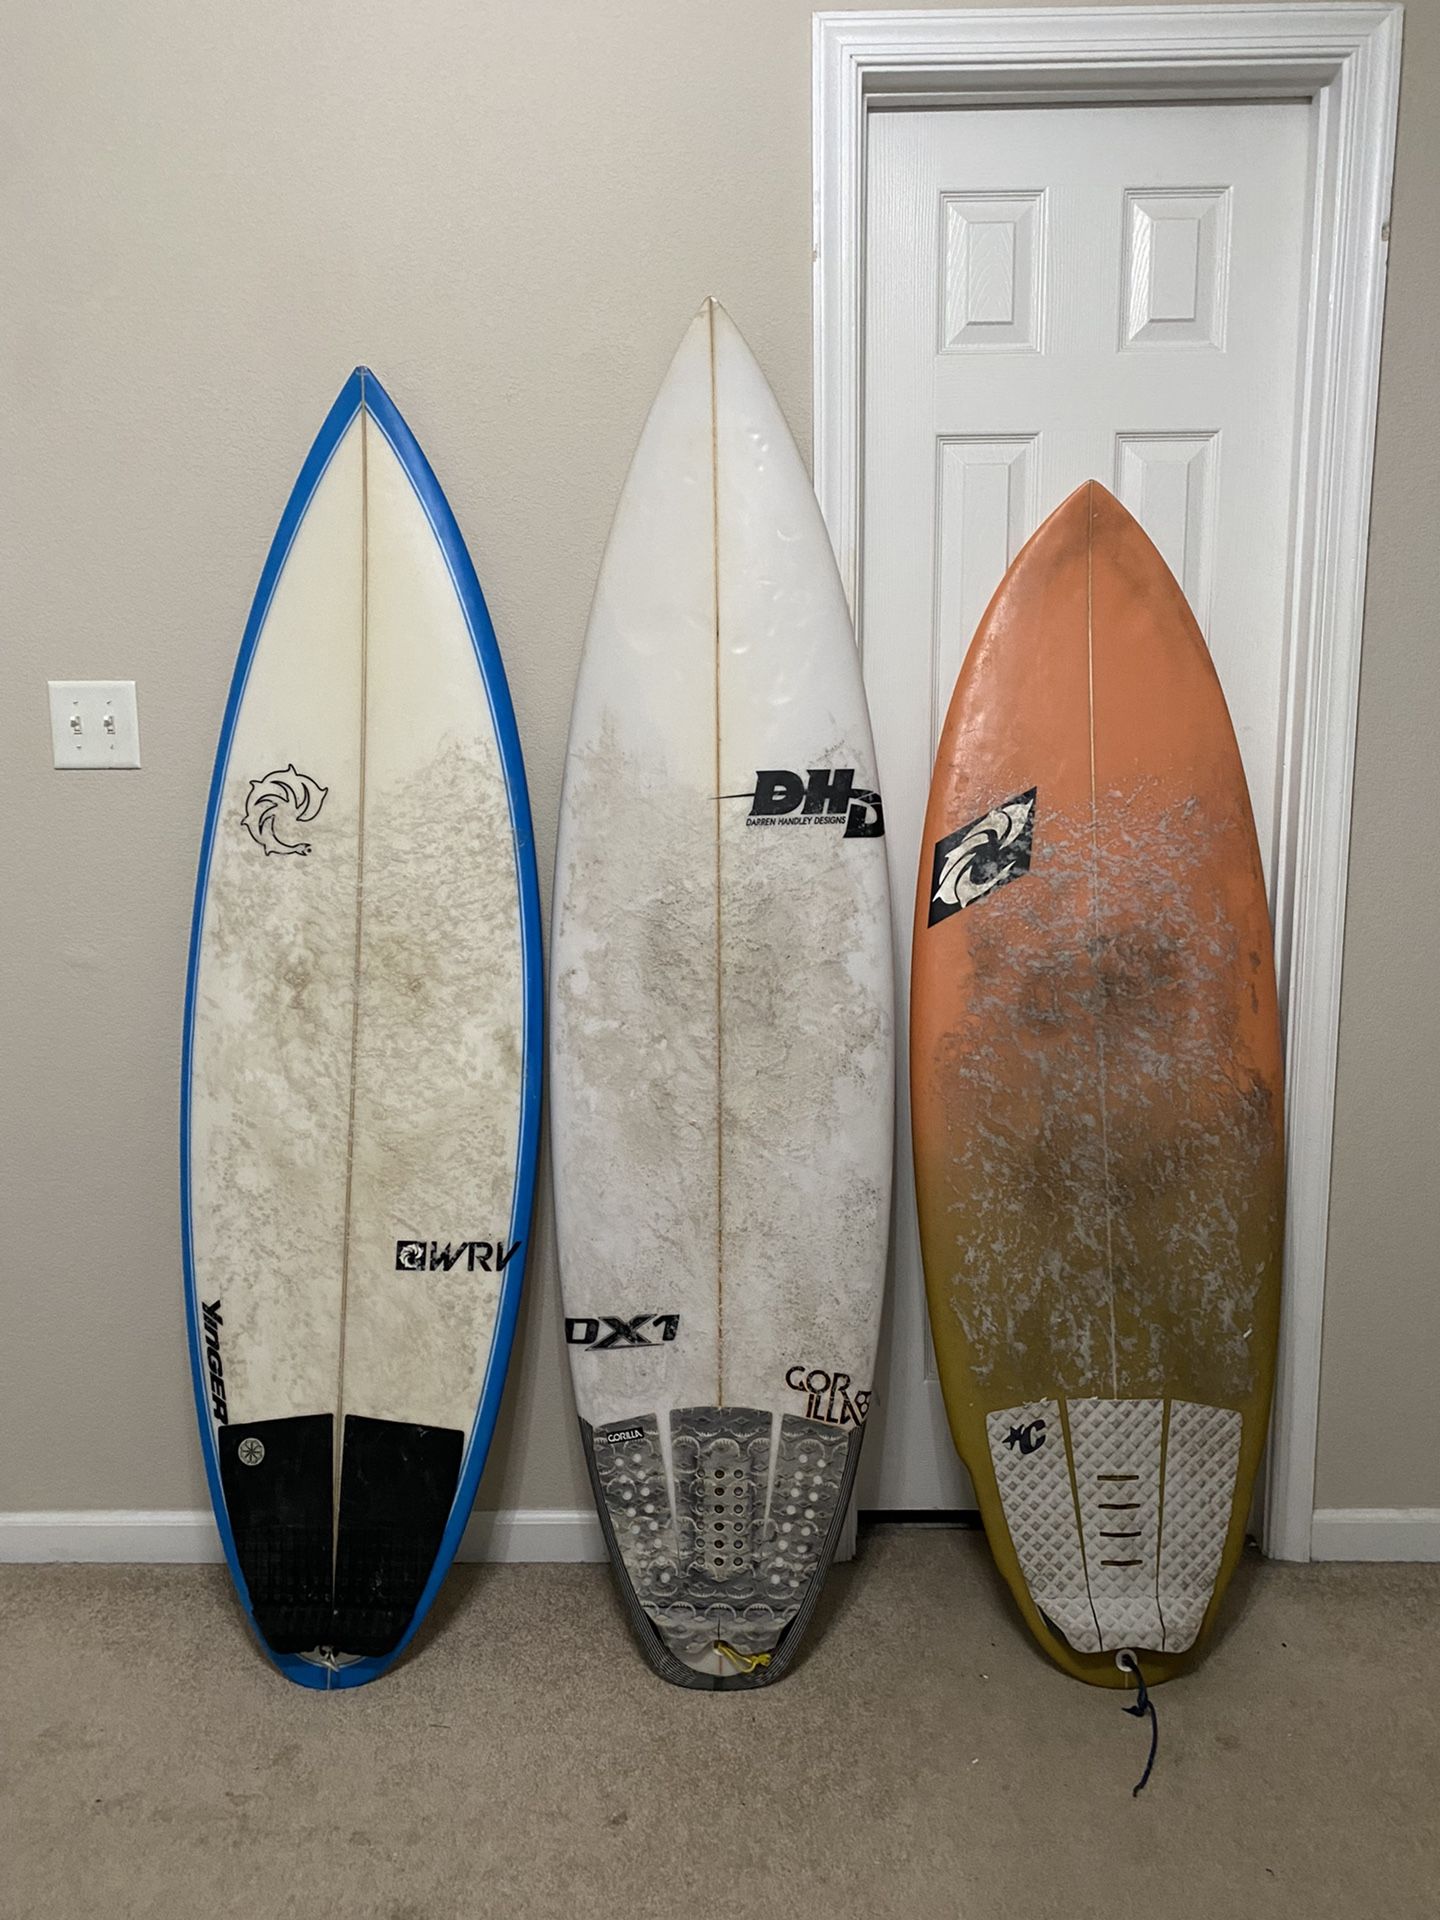 Surfboard WRV, DHD Surfboards